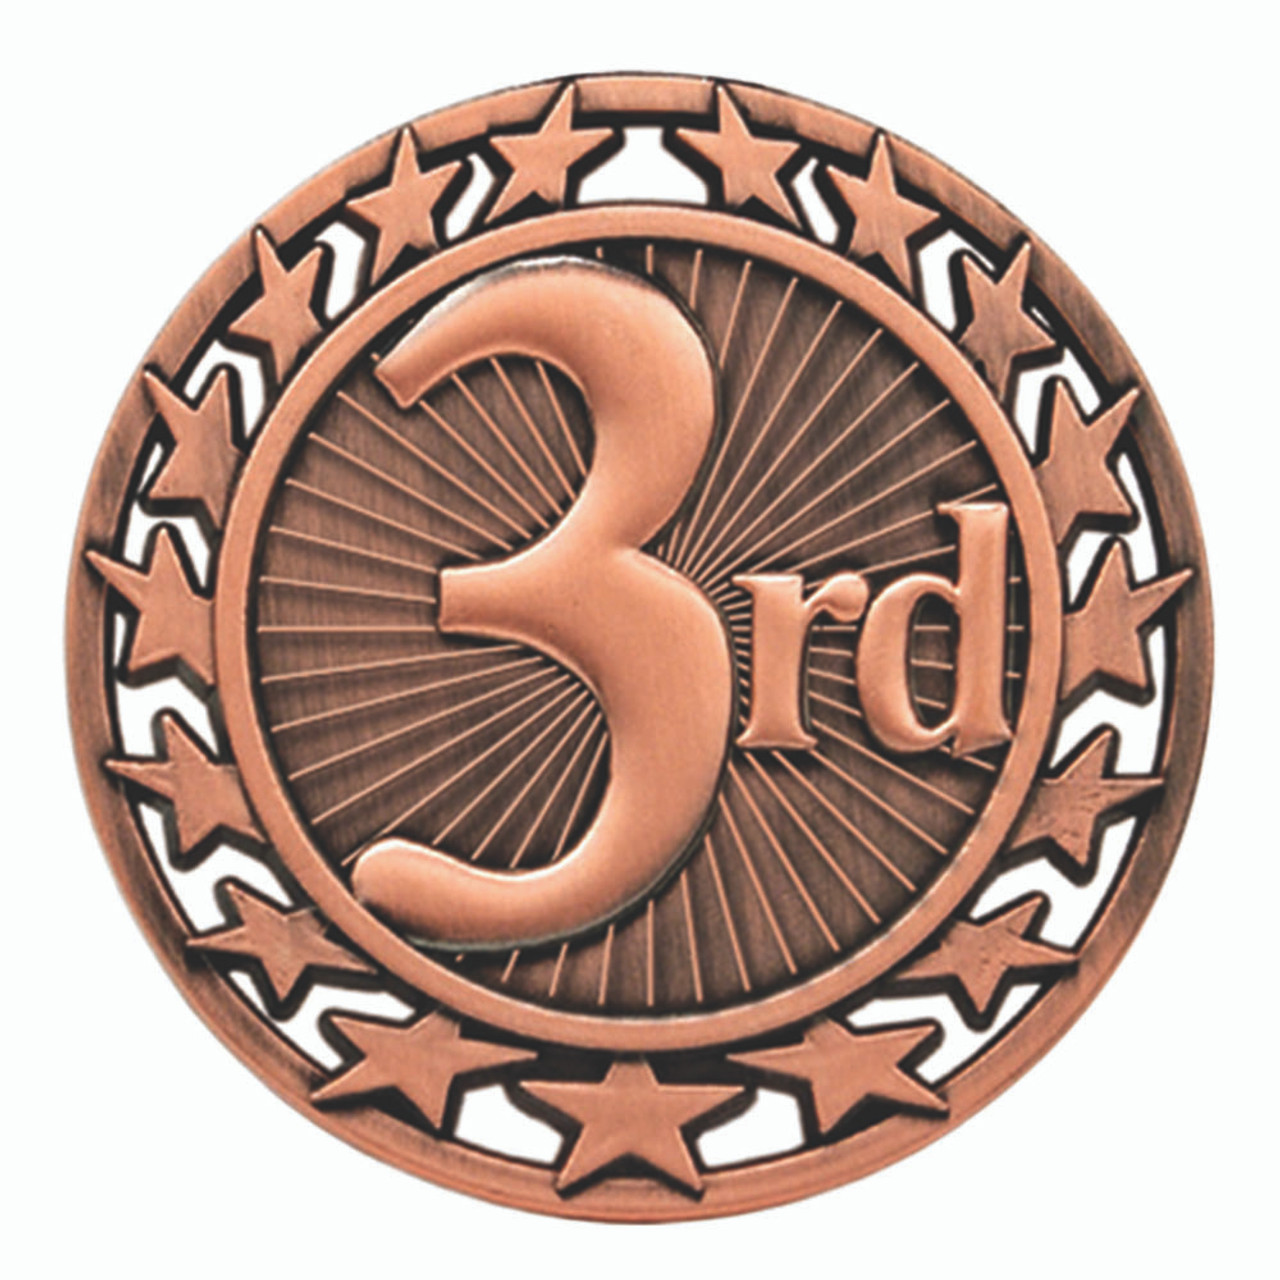 sm-163-3rd-place-bronze-only__25898.1528623300.jpg